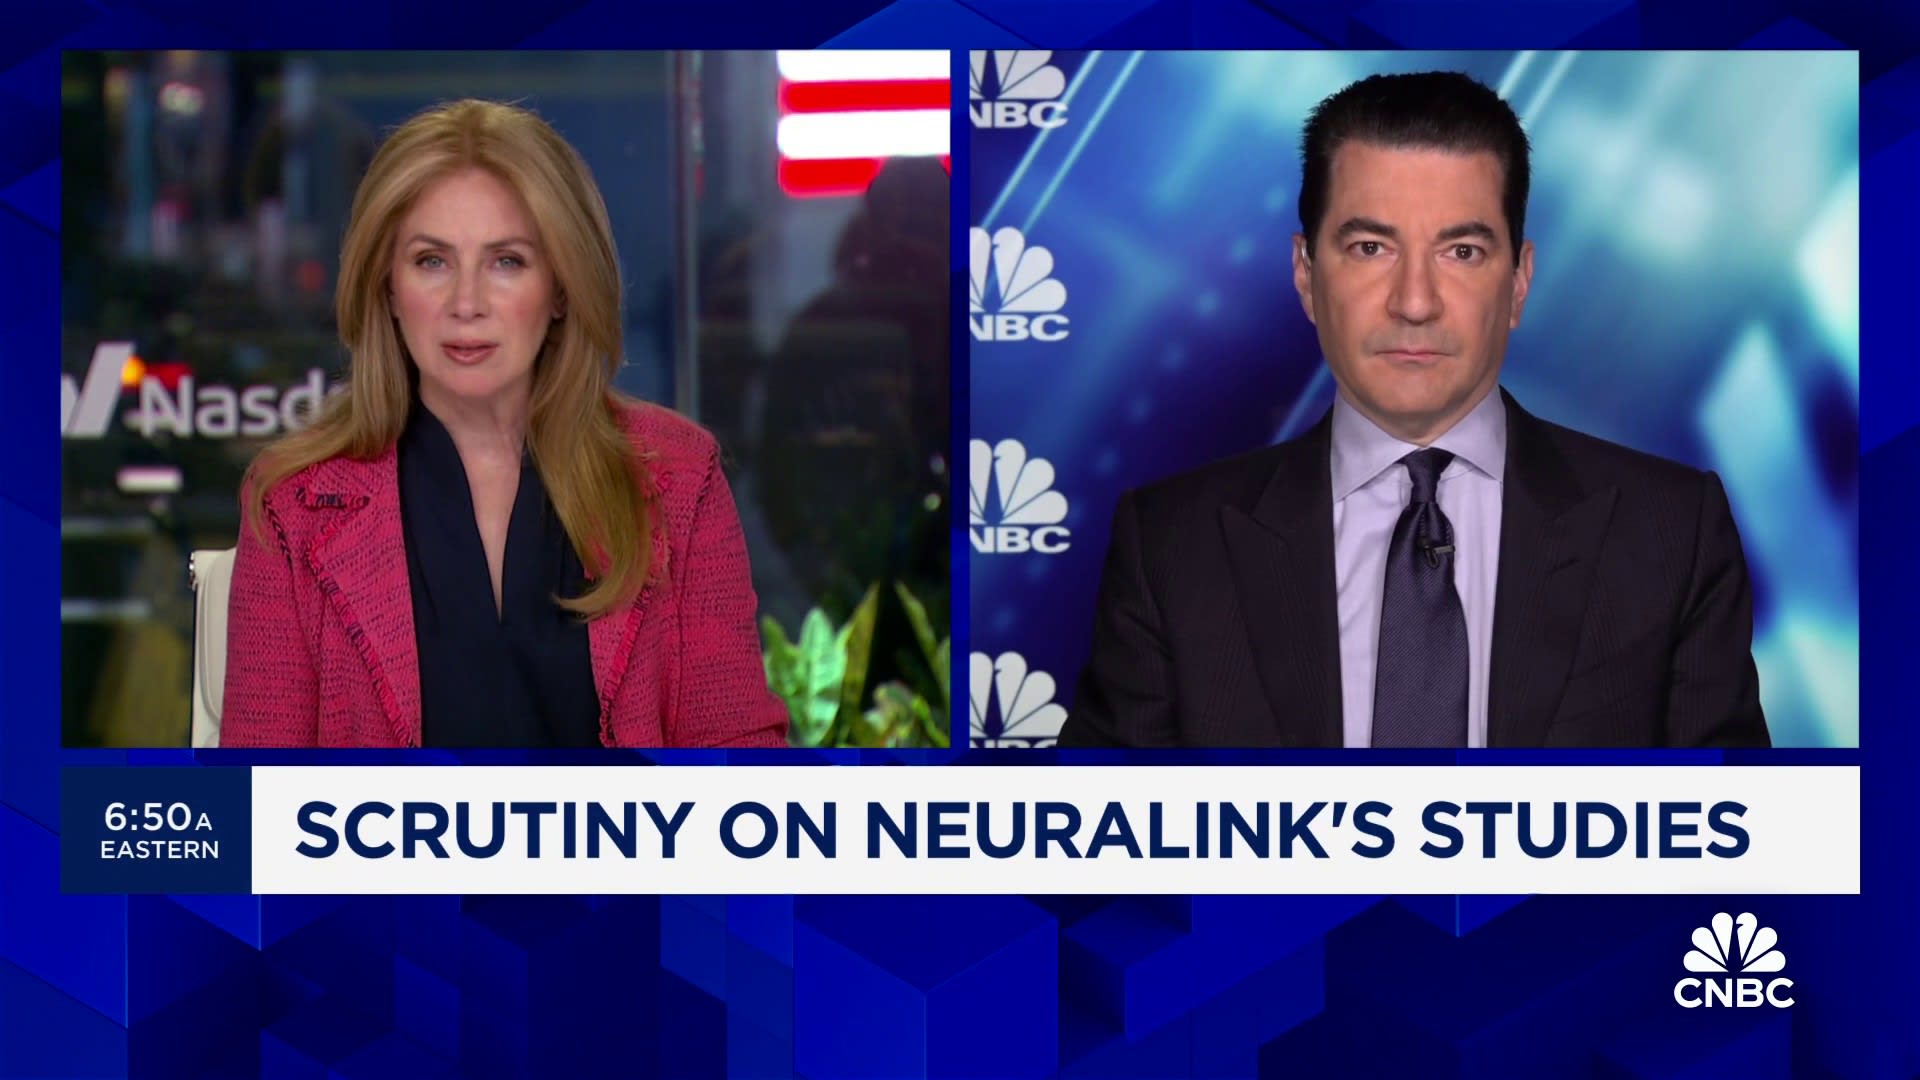 The technology behind Neuralink's implants has promise: Former FDA Commissioner Dr. Scott Gottlieb